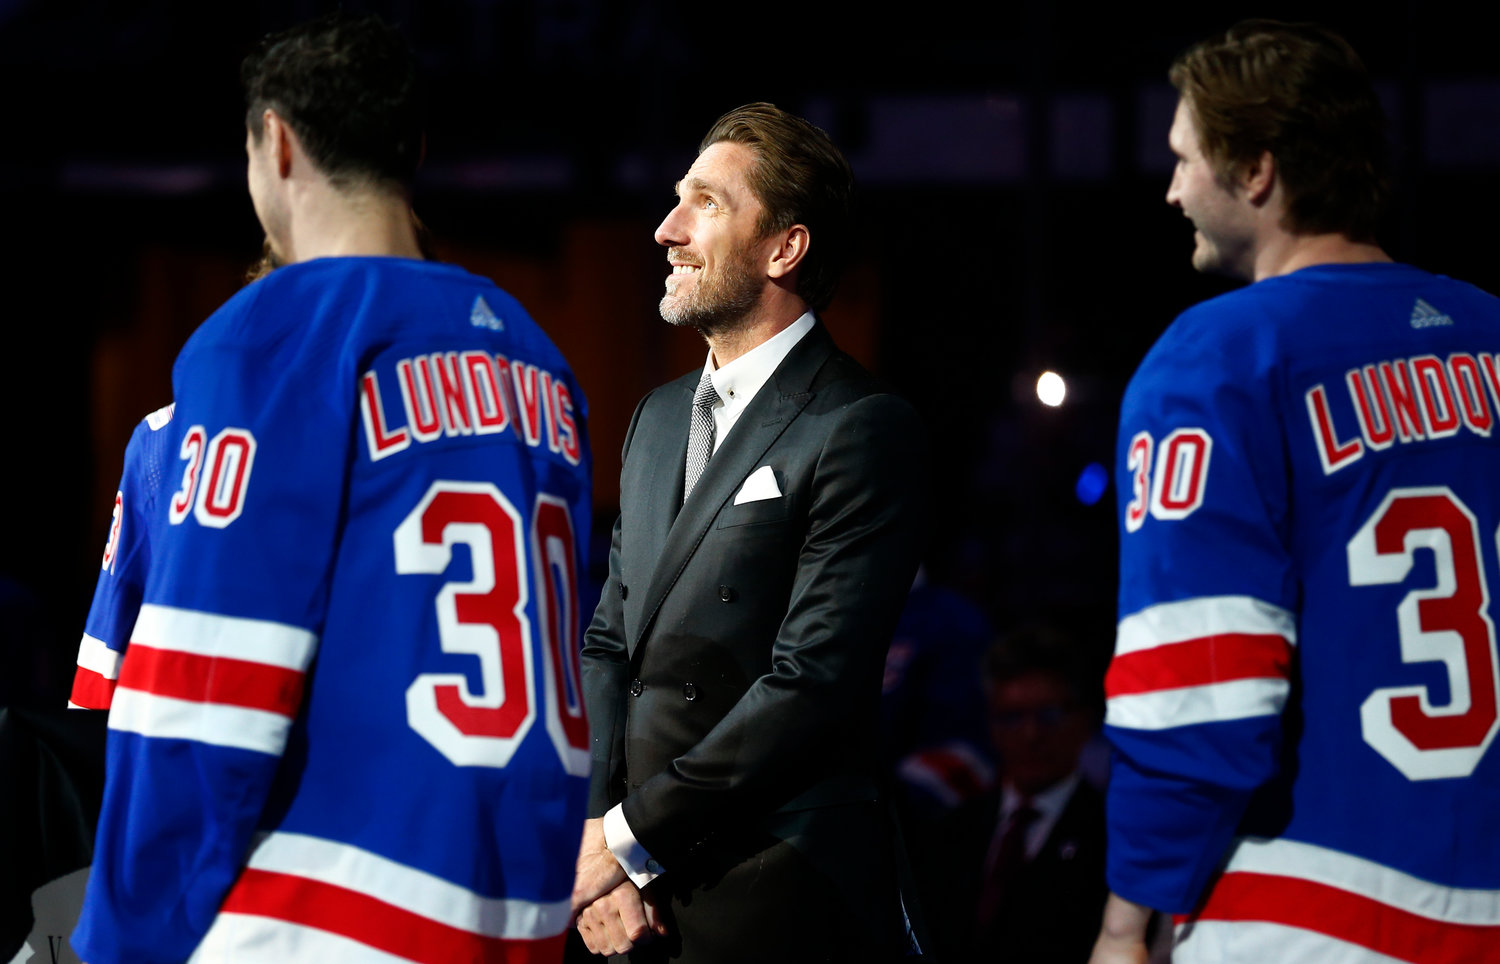 LUNDQVIST HONORED — Former Rangers goaltender Henrik Lundqvist, center, watches as his number is retired before an NHL game between the Rangers and the Wild on Friday night in New York. He was joined on the ice by current Rangers players wearing his jersey.